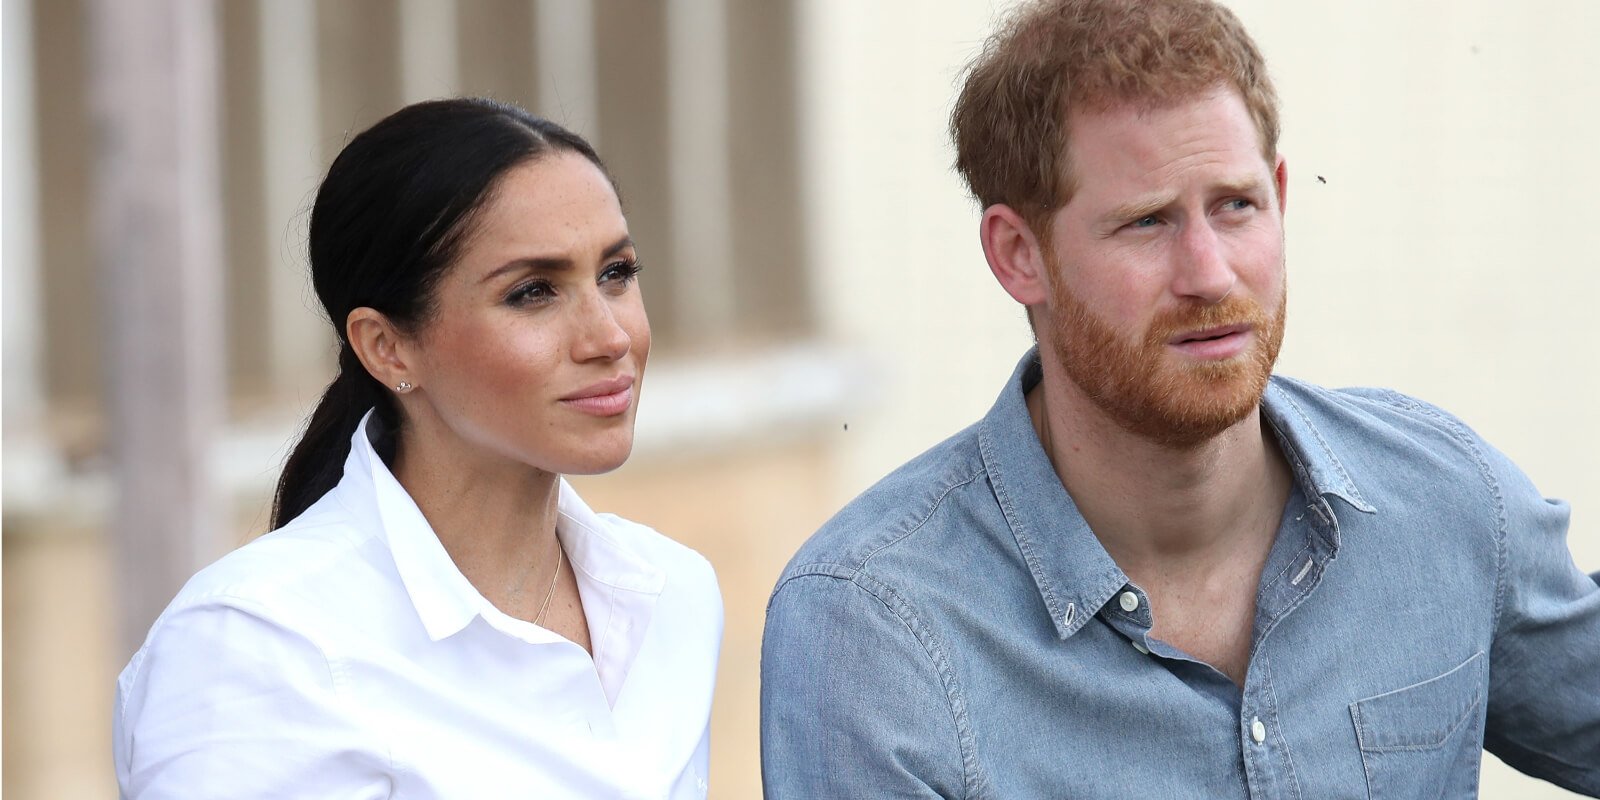 Meghan Markle and Prince Harry photographed together in 2018 in Dubbo, Australia.